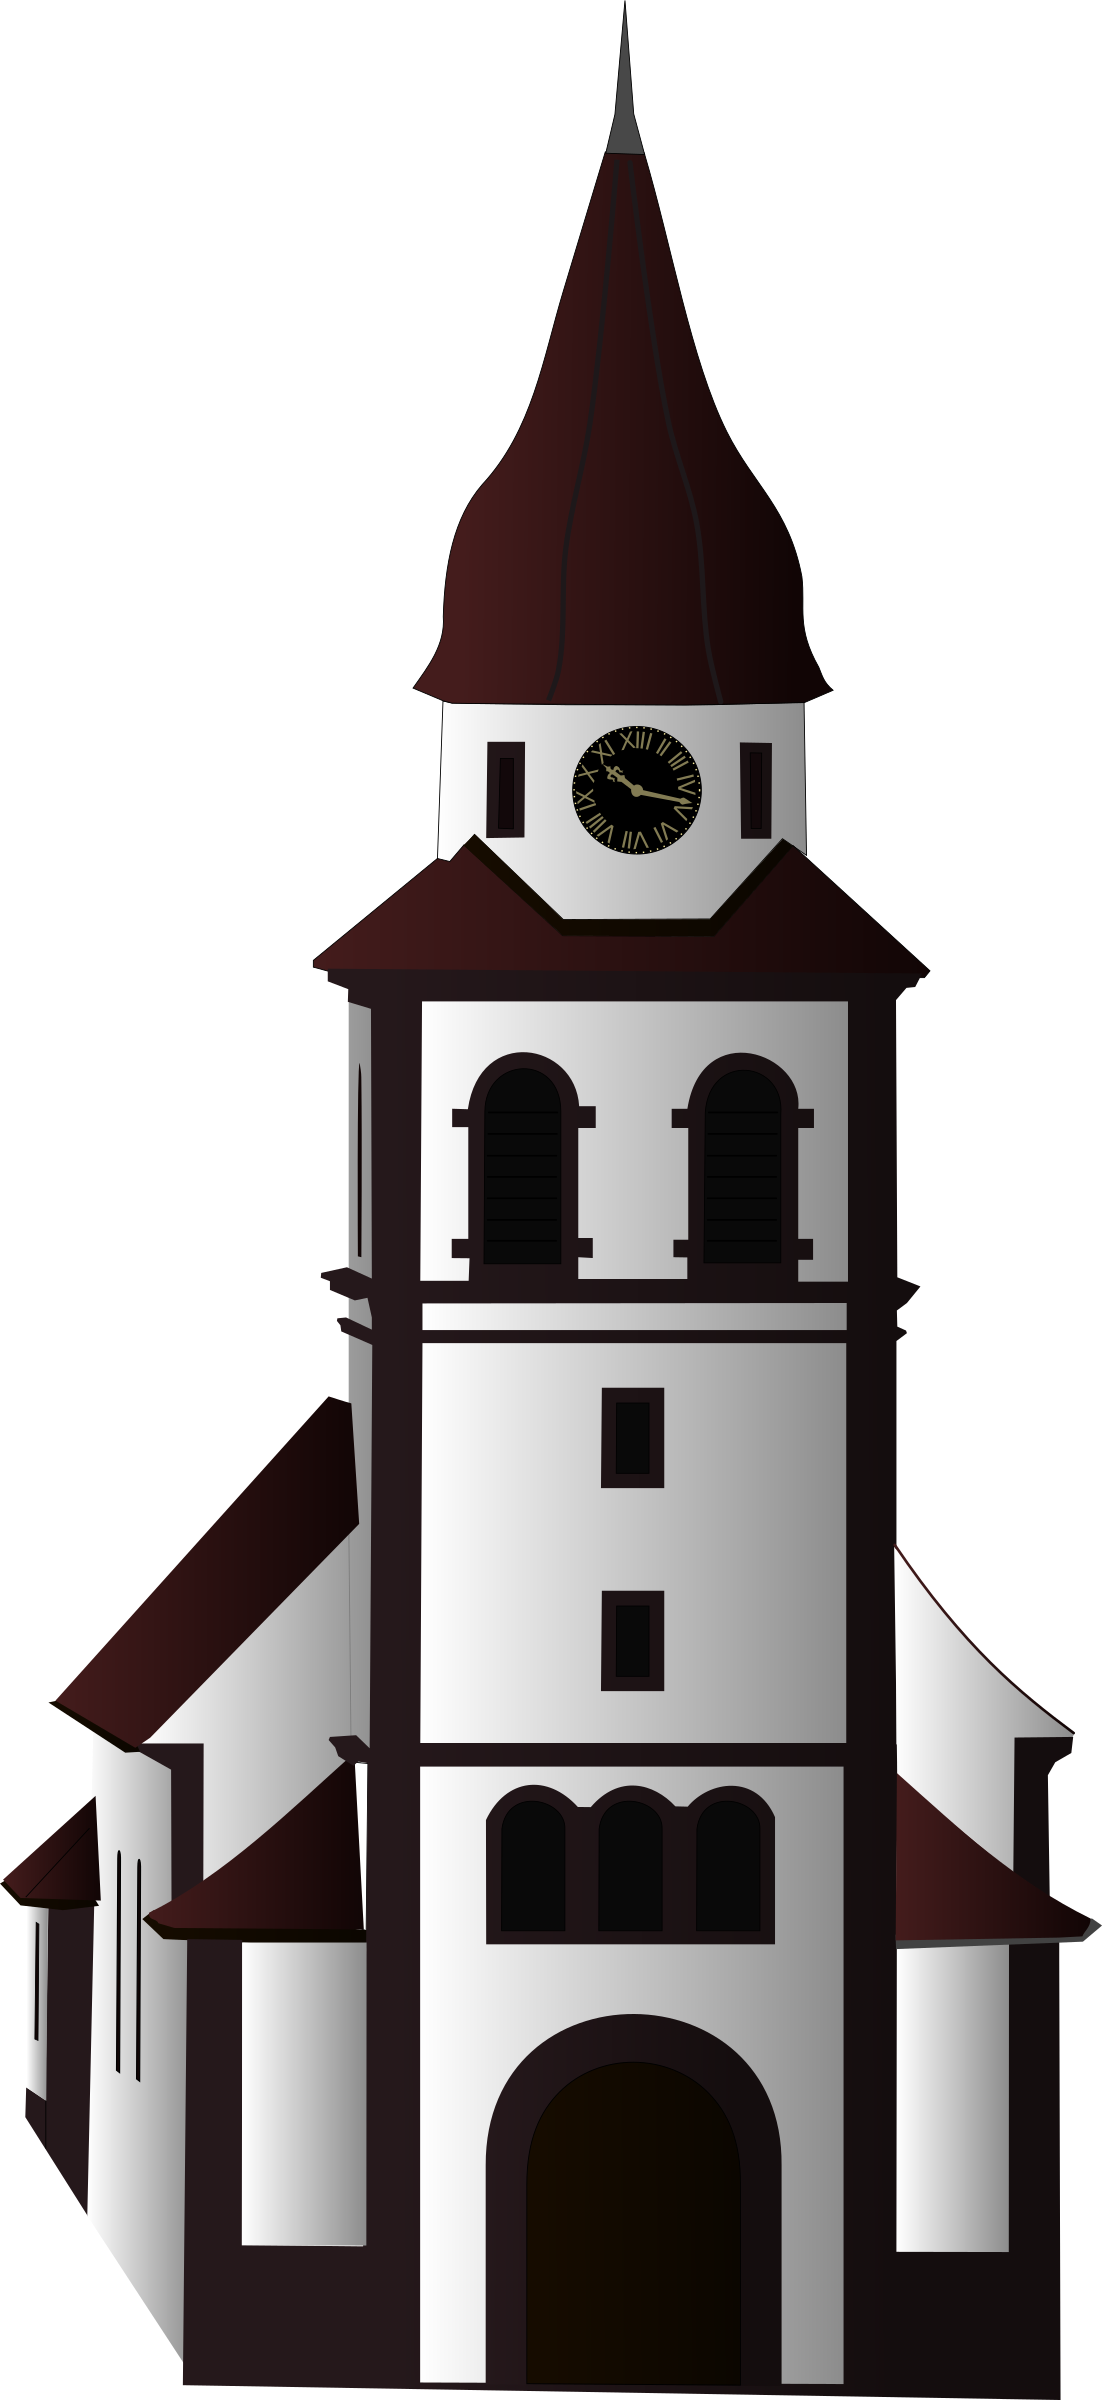 Small petite eglise icons. Clipart png church